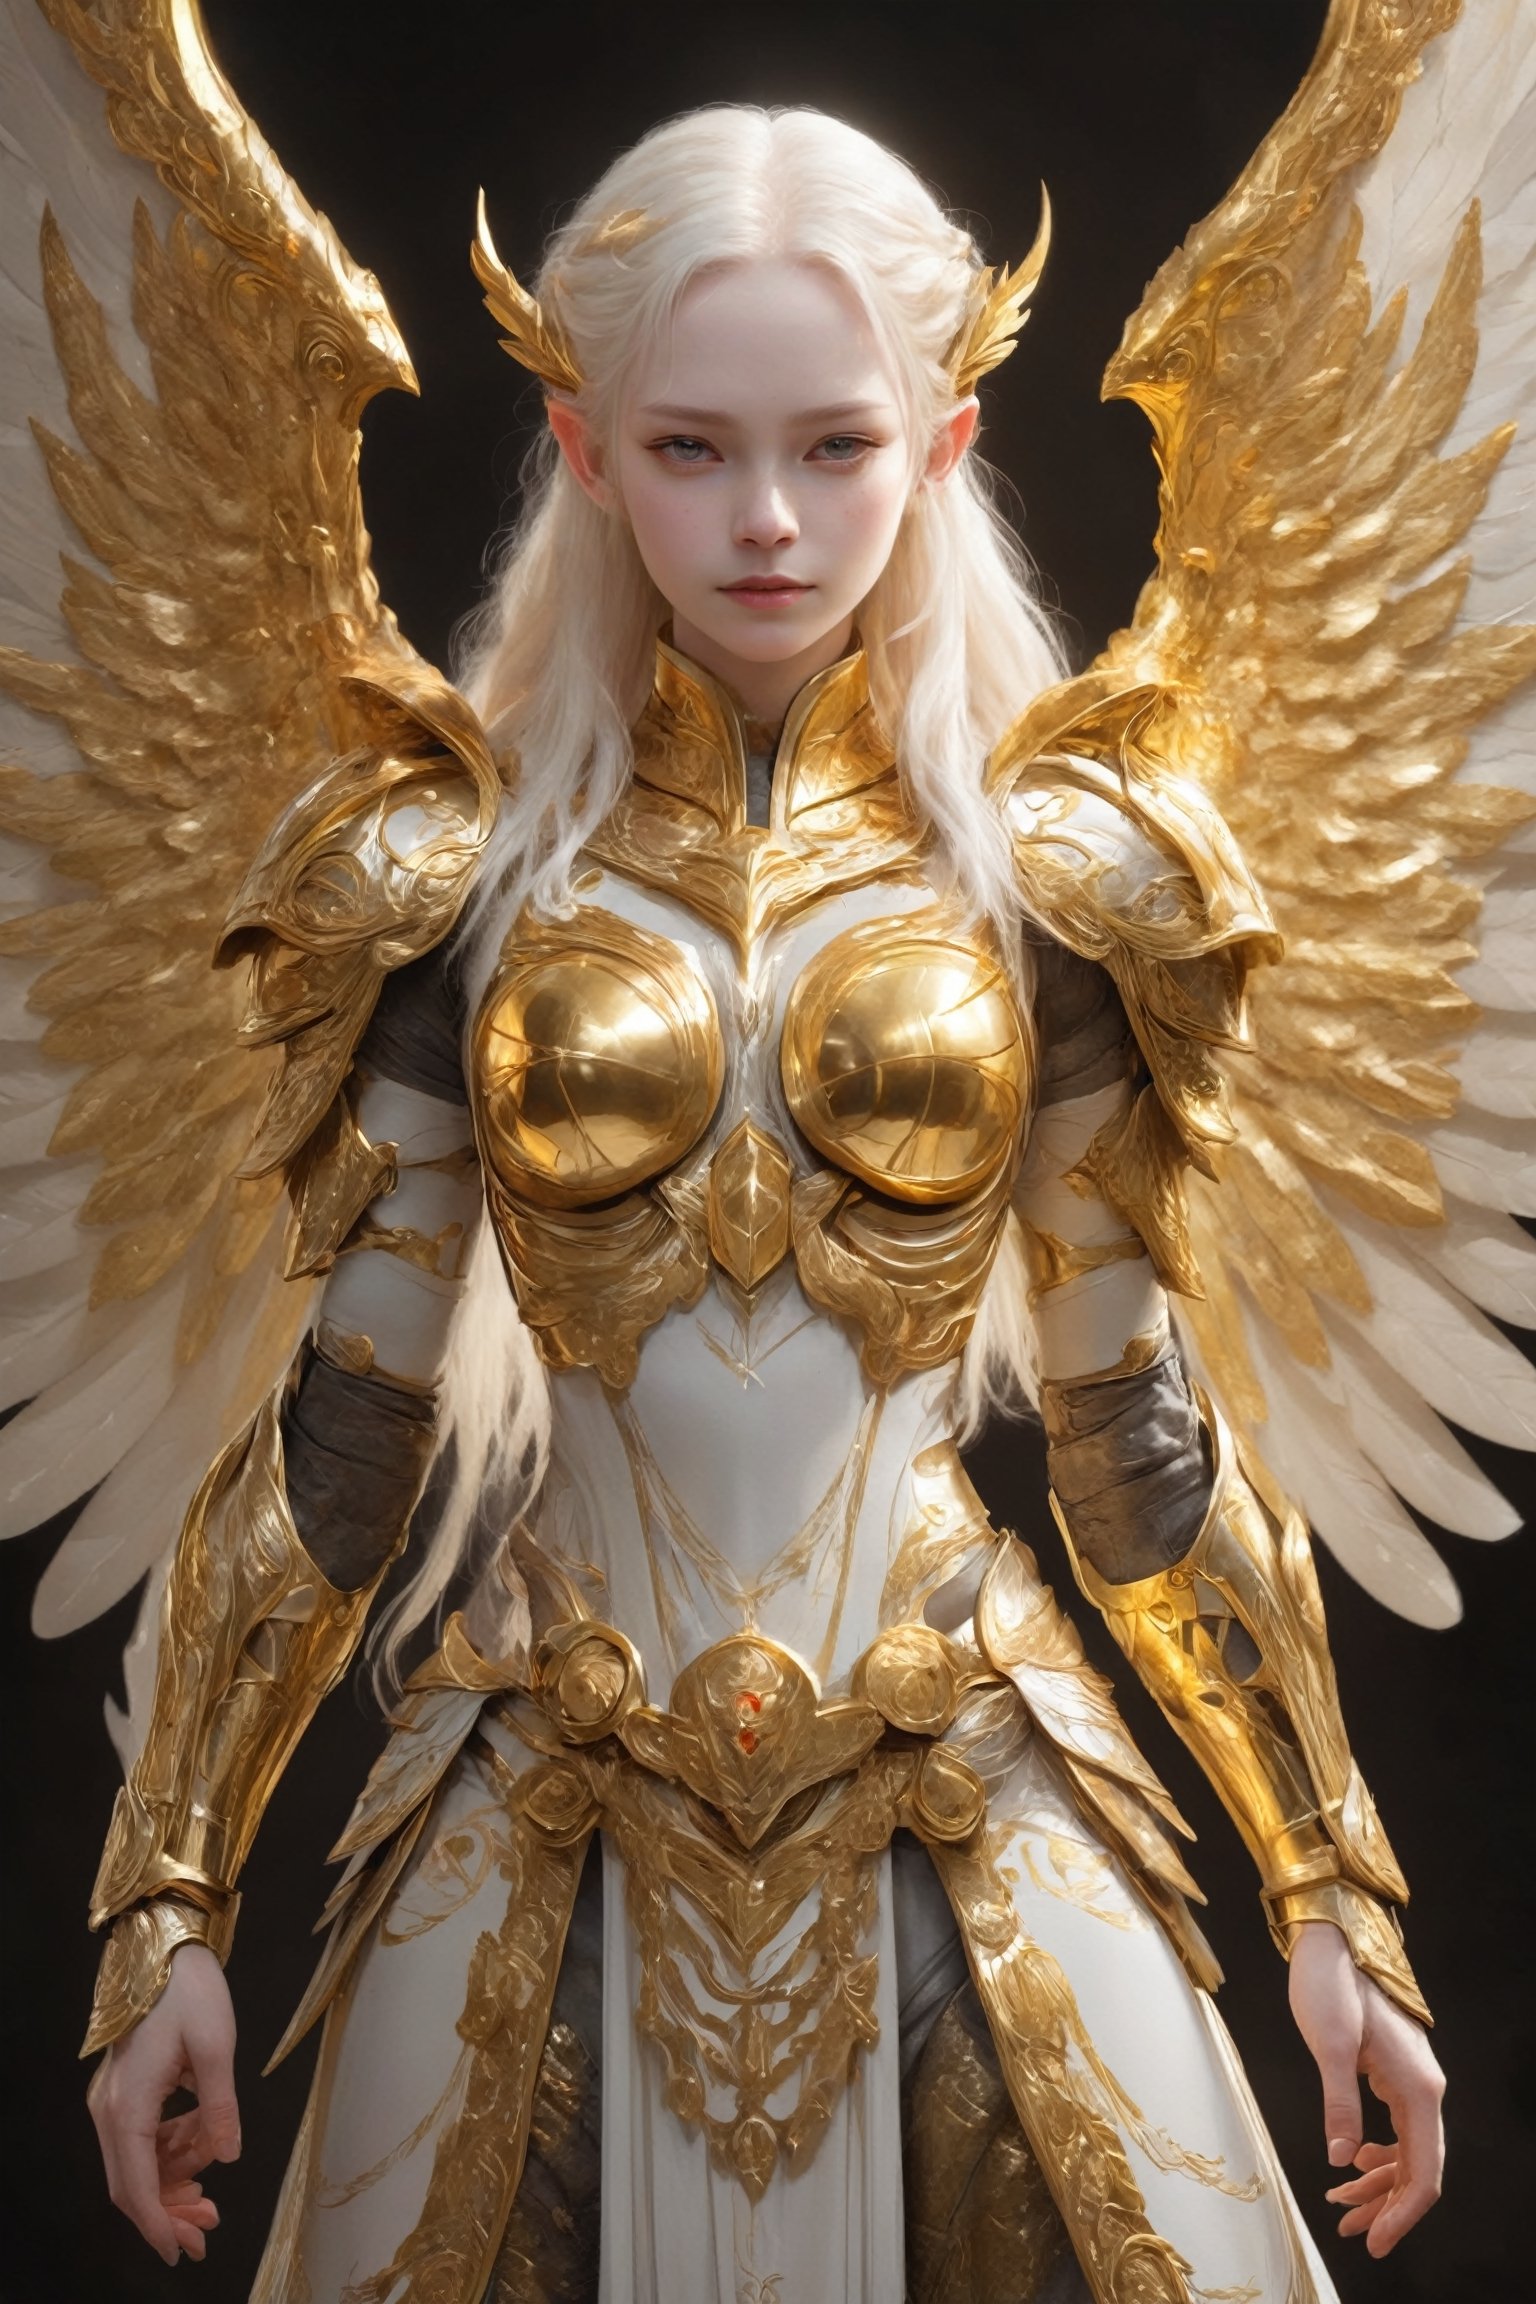 1girl, Beautiful albino Valkyrie,stands adorned in resplendent golden armor, radiating strength and nobility. The intricate design of the golden armor accentuates her fierce and regal presence,
metallic neon grow wing,real_booster